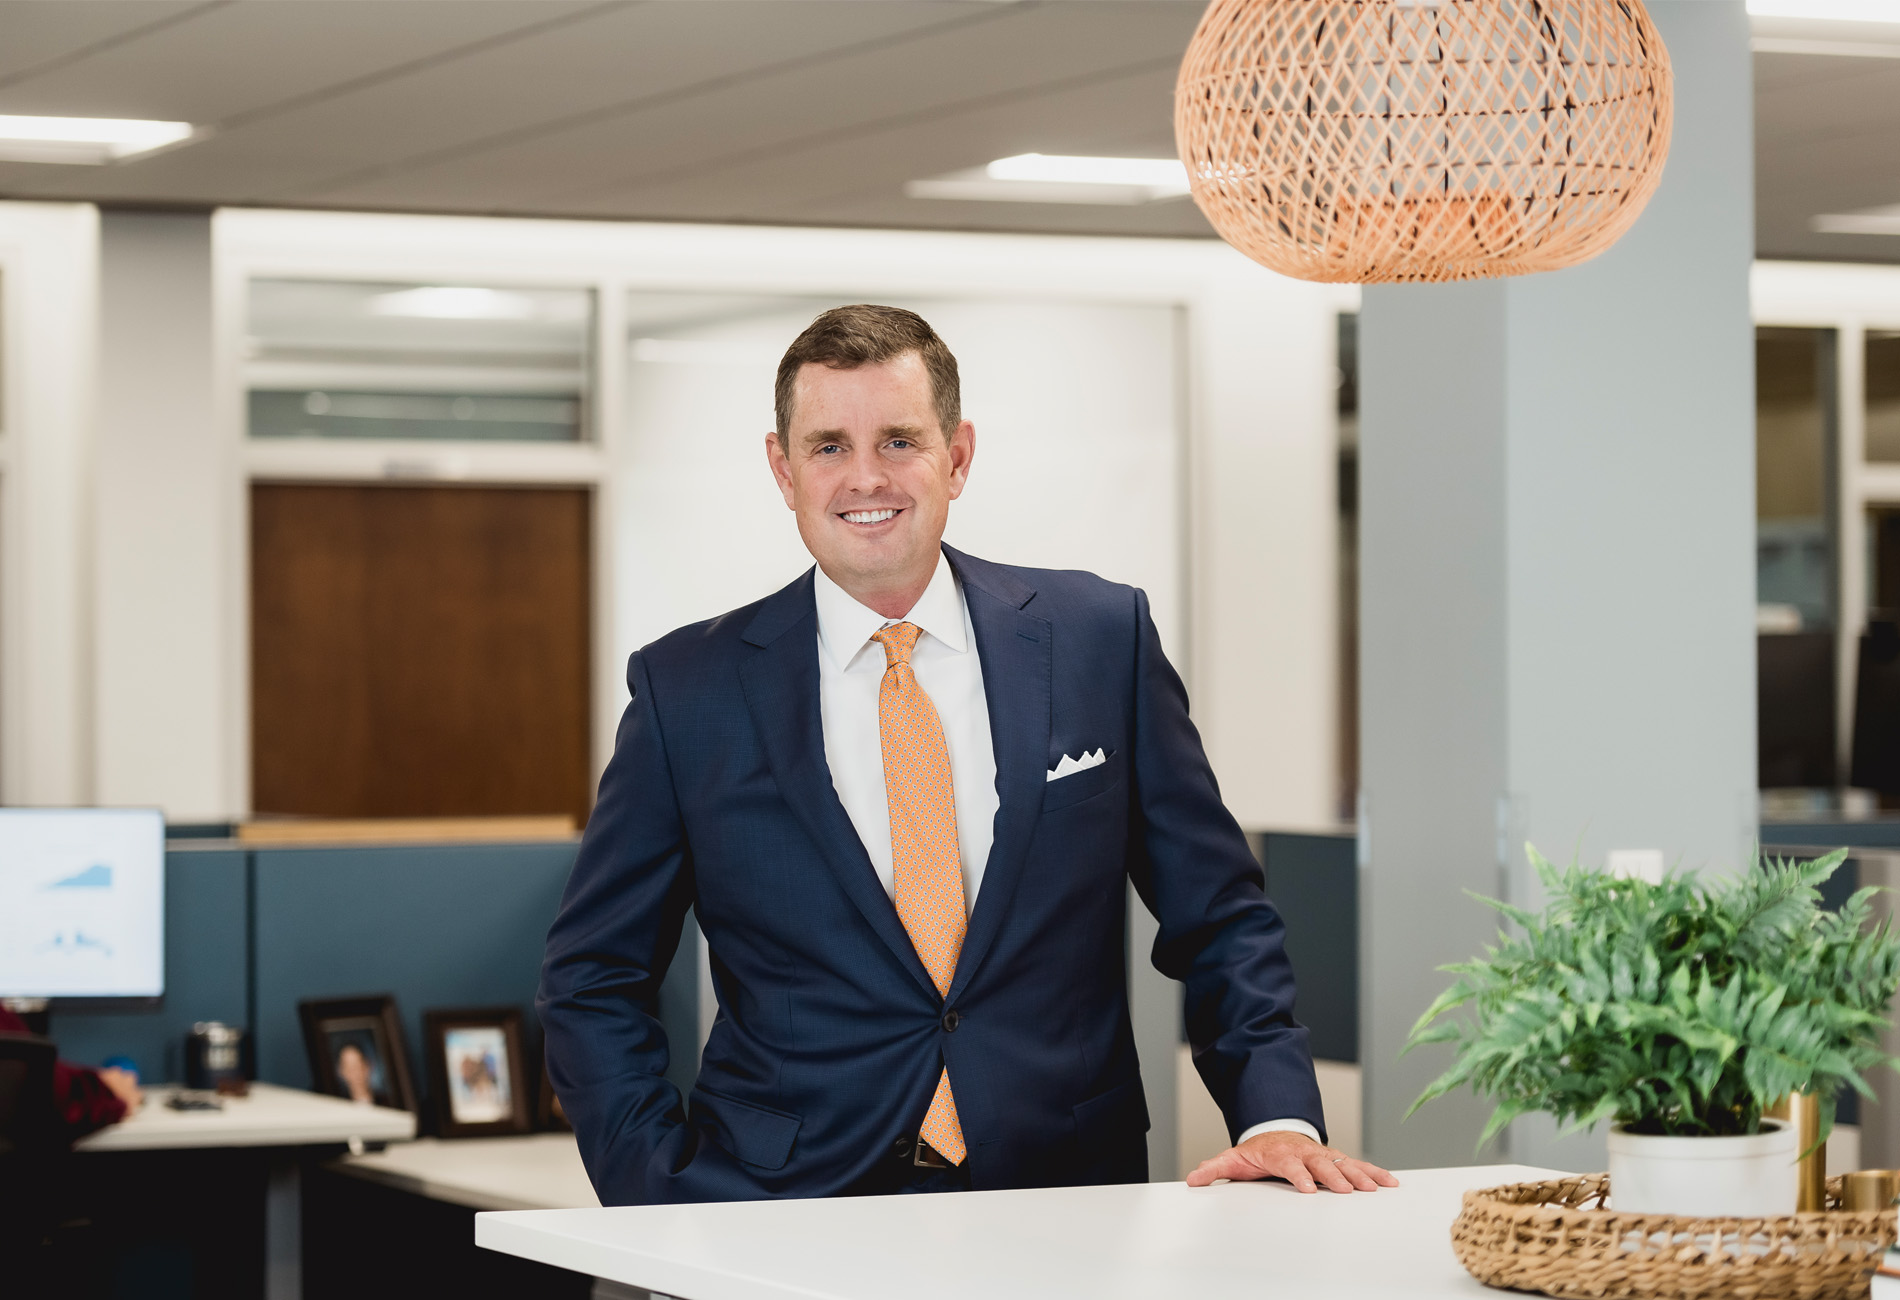 Alan Leist III CFA, CEO, Financial Advisor: A man with short brown hair wearing a blue sport coat and tie. Strategic Financial Services Leadership Team.